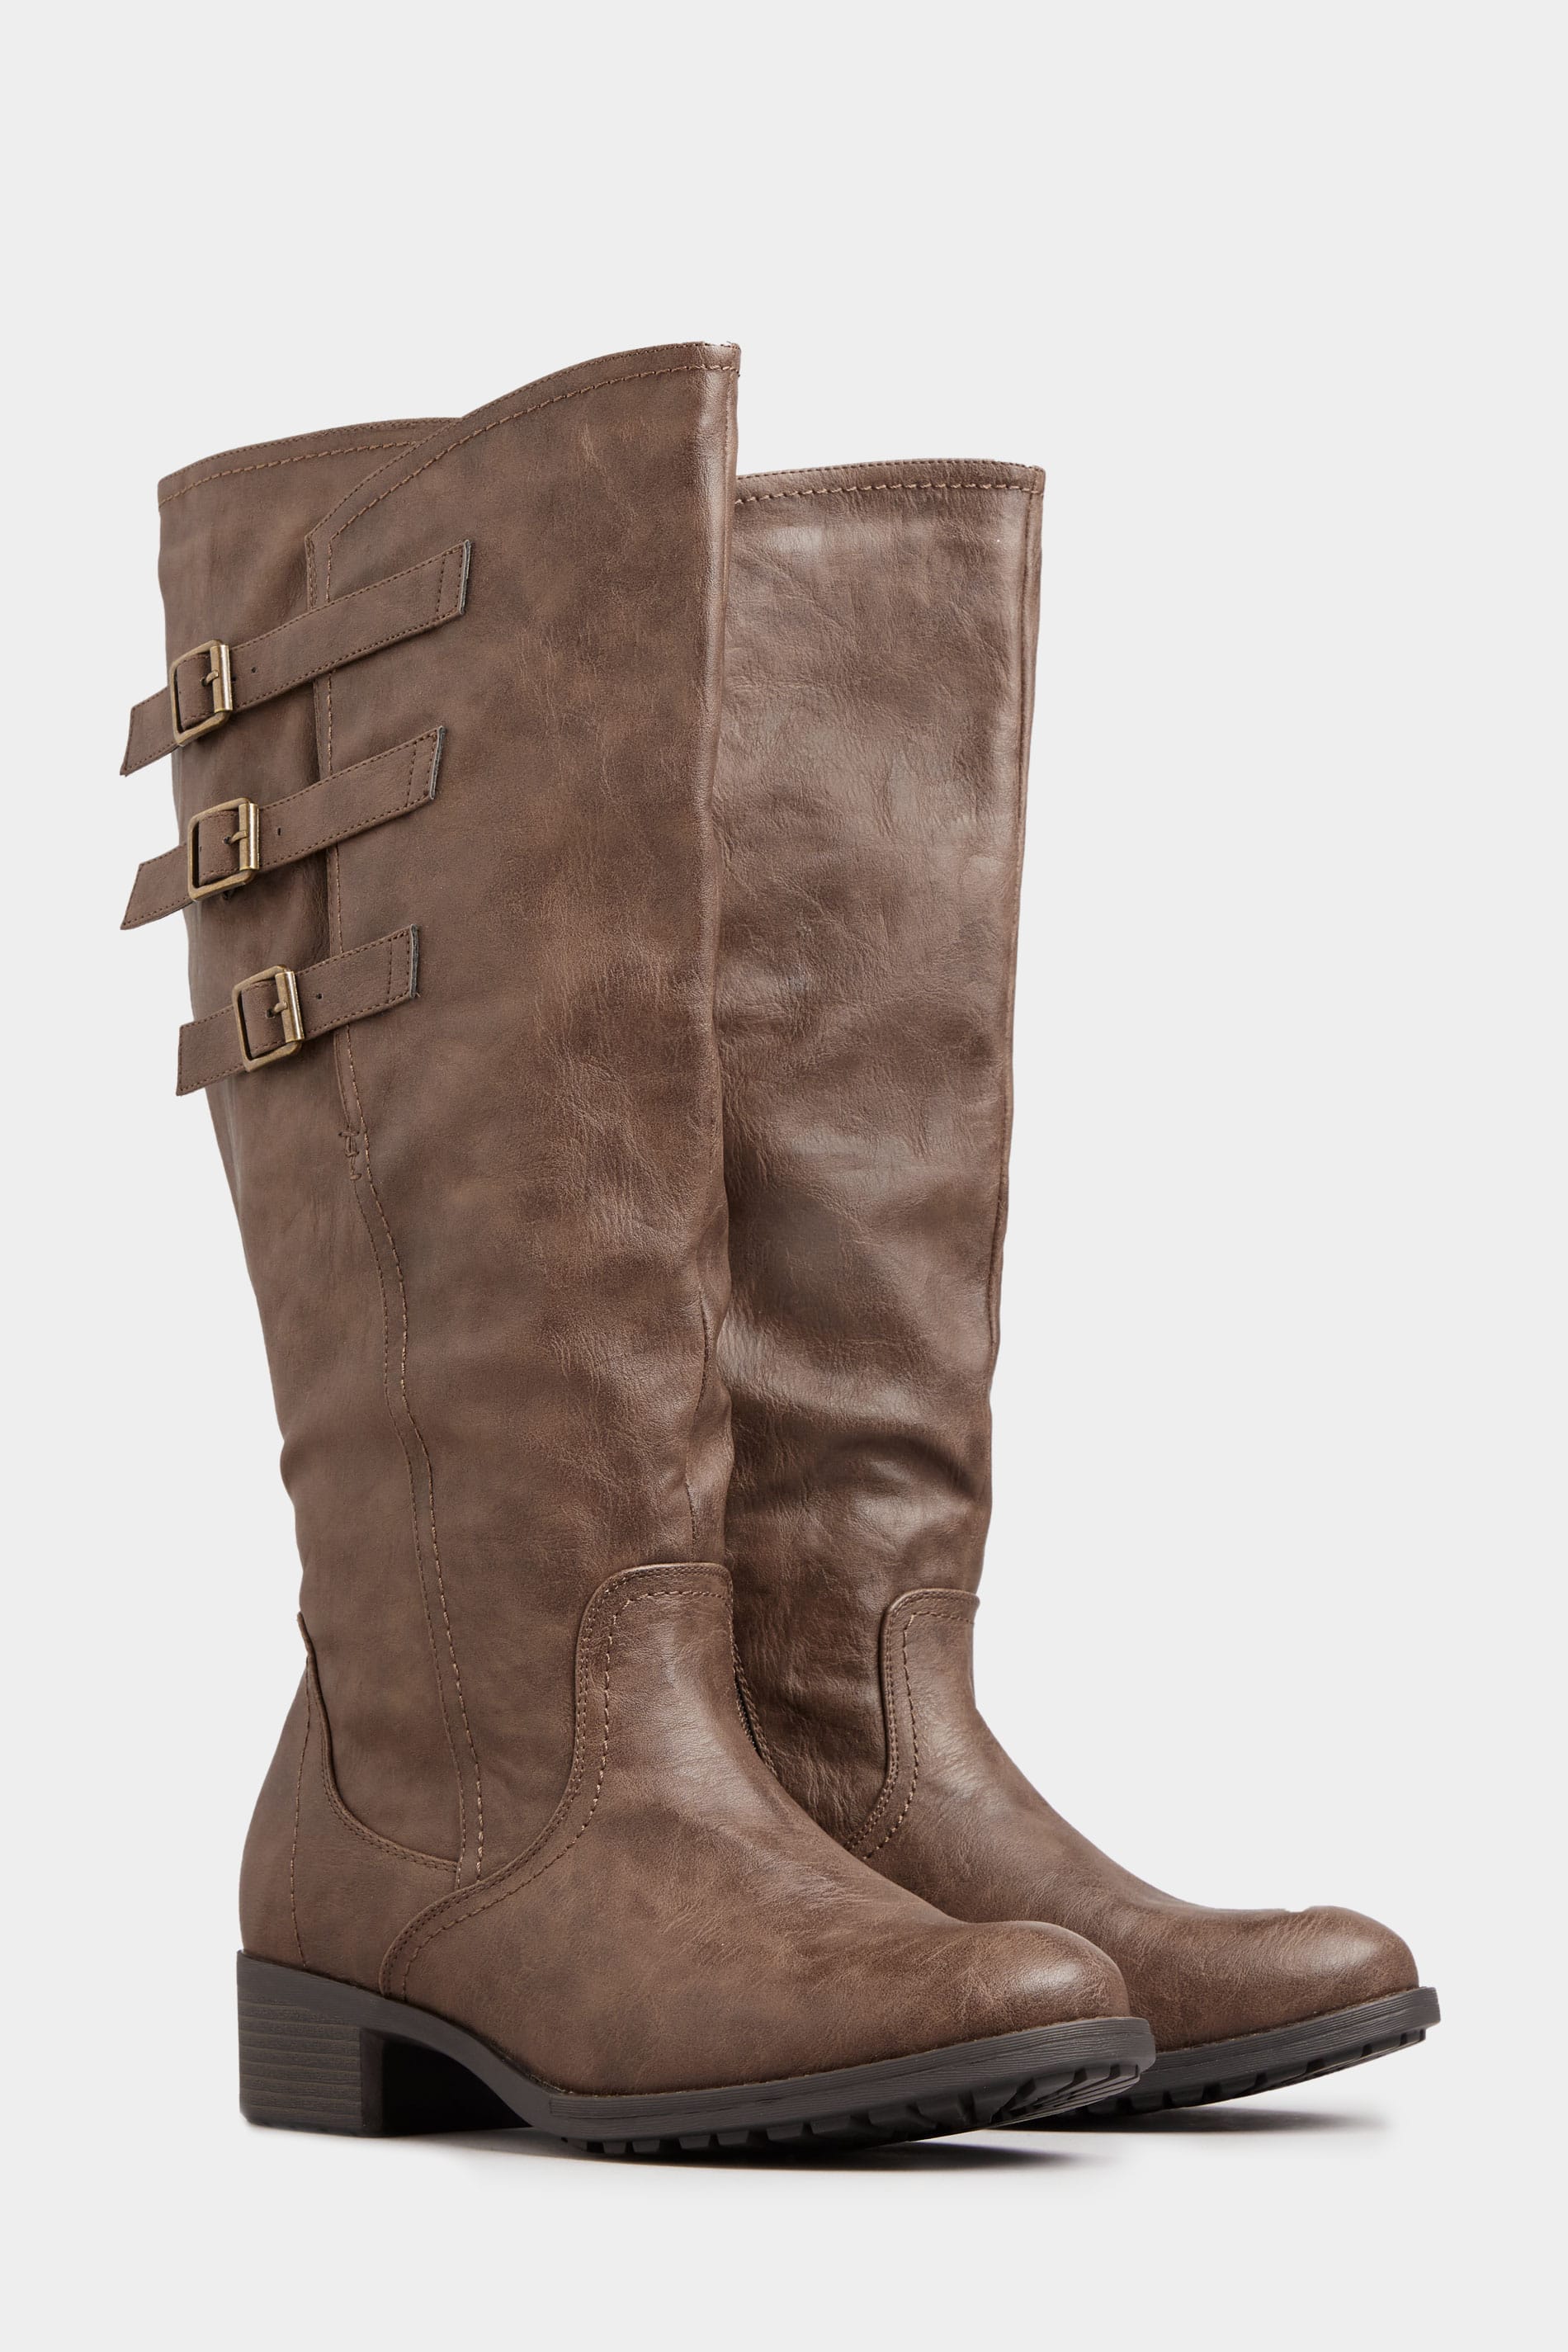 Brown Knee High Boots In Extra Wide Fit with Adjustable Straps | Yours ...